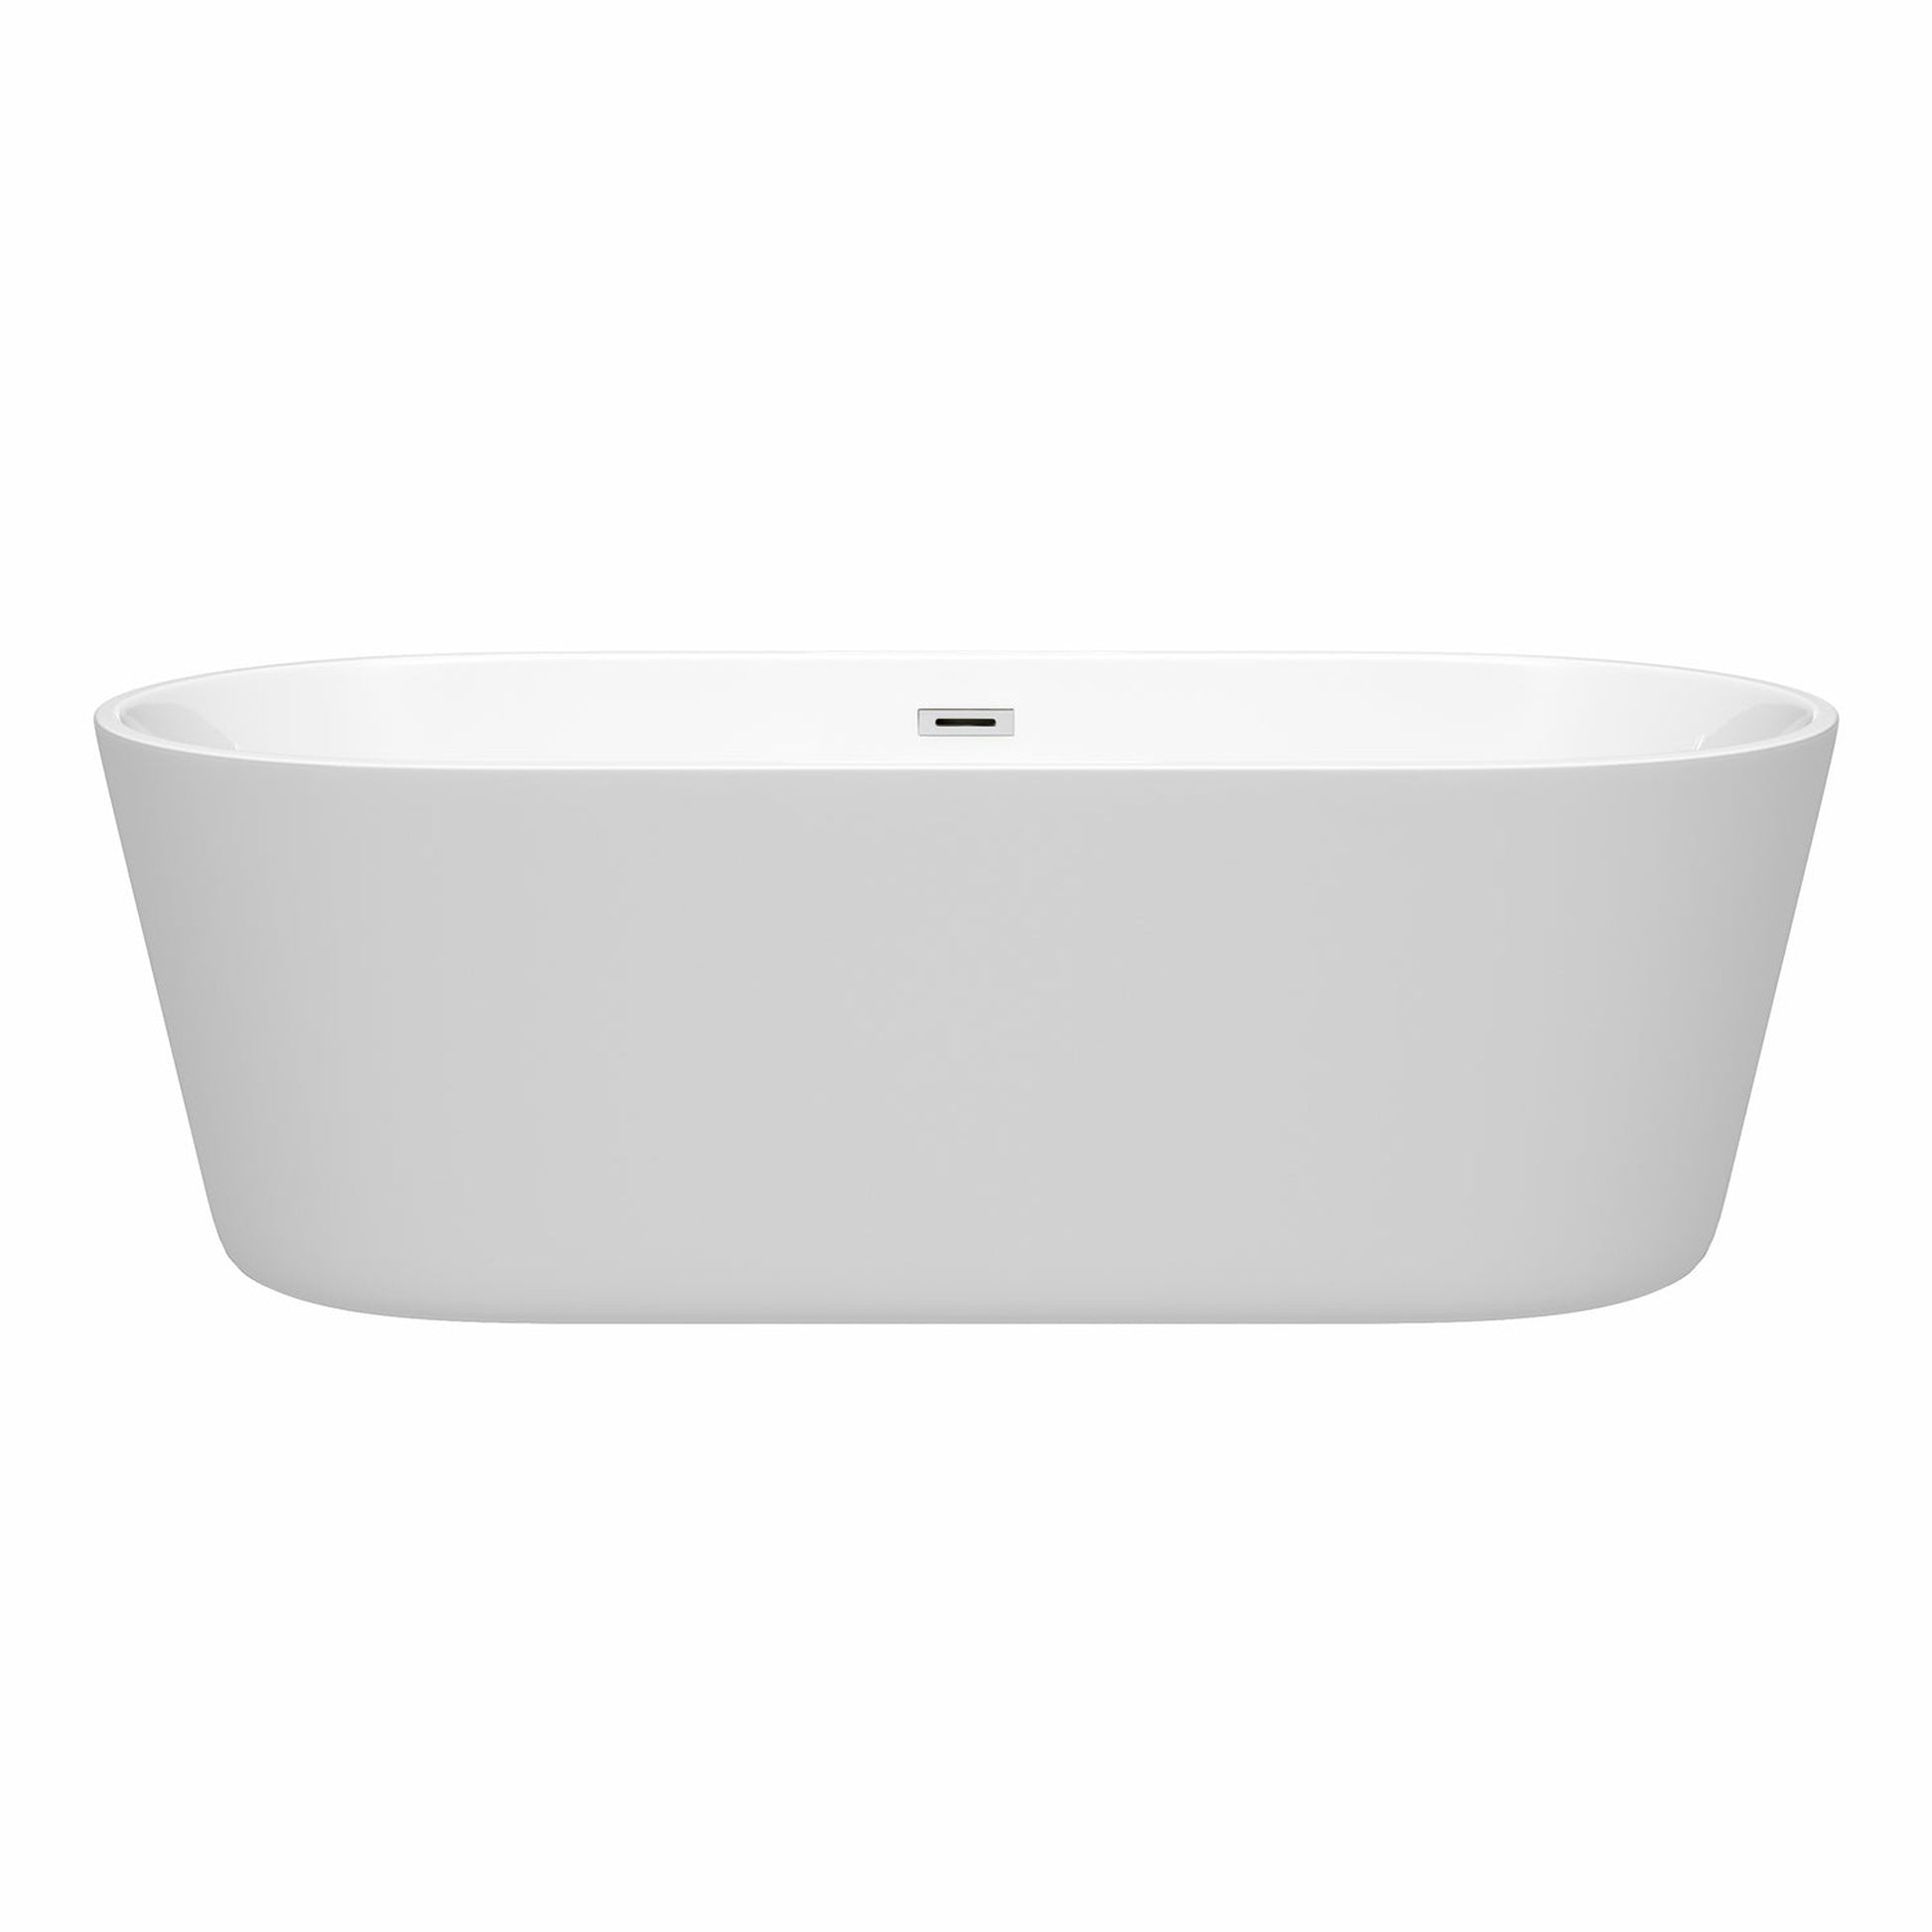 Wyndham Collection Carissa 71" Freestanding Bathtub in White With Polished Chrome Drain and Overflow Trim